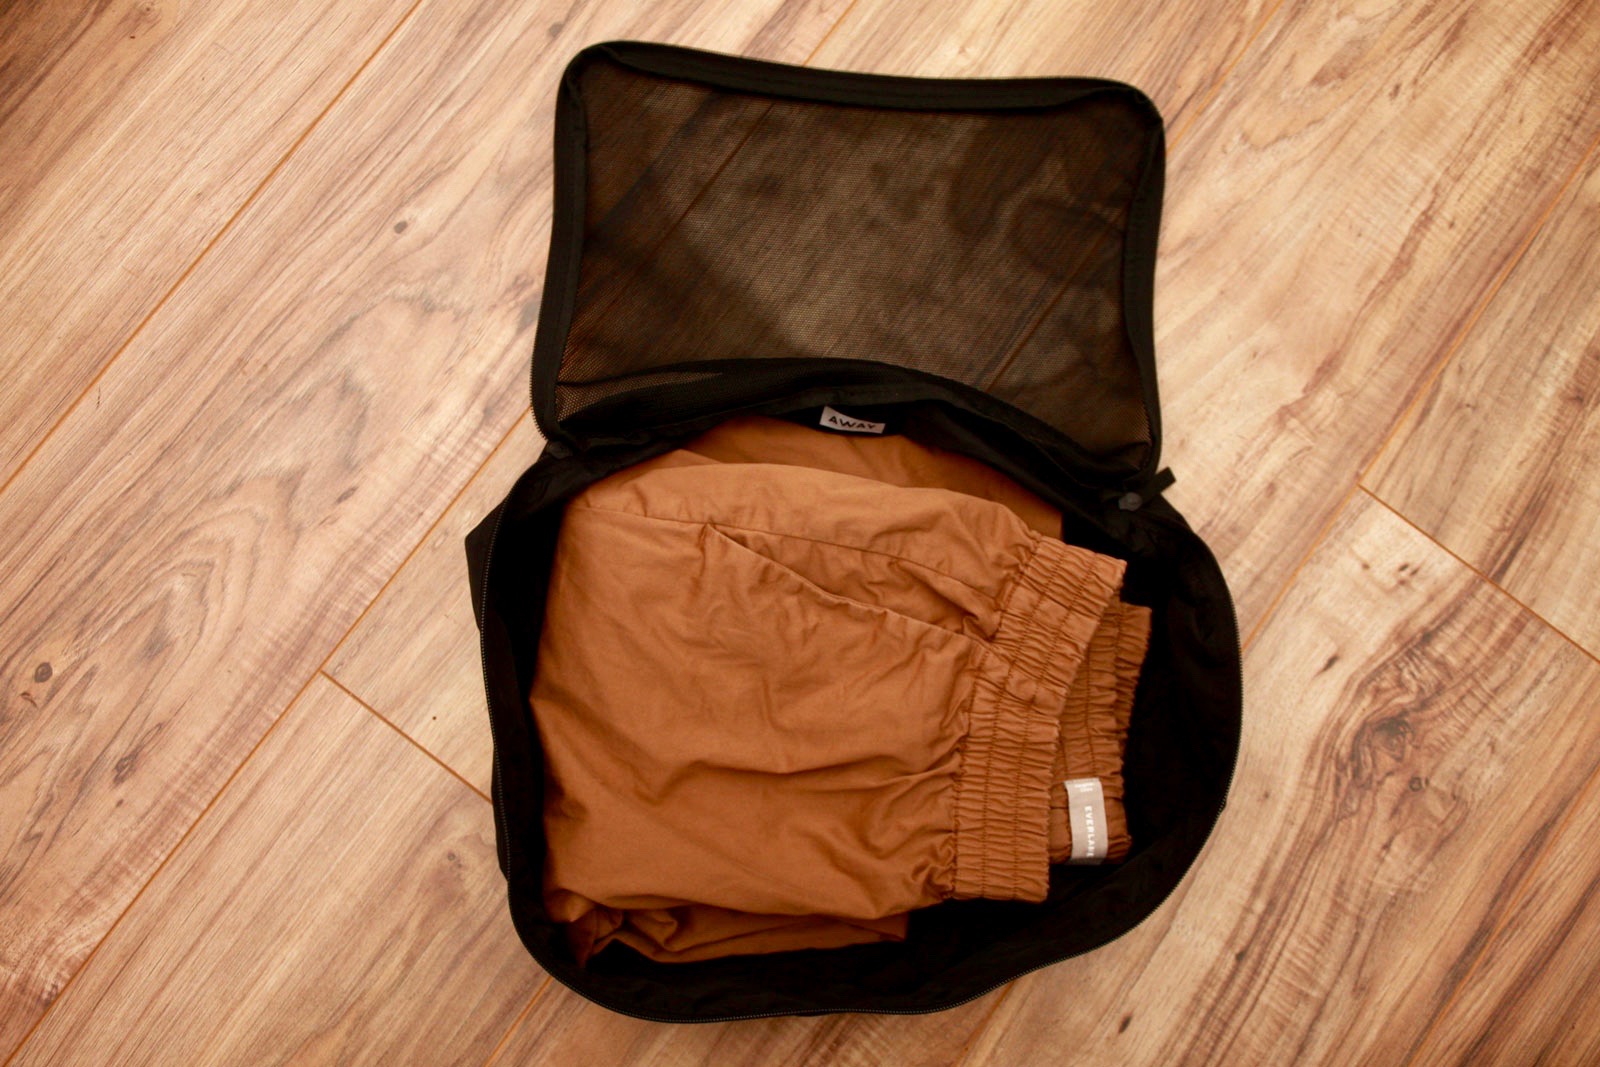 A pair of pants in an Away packing cube